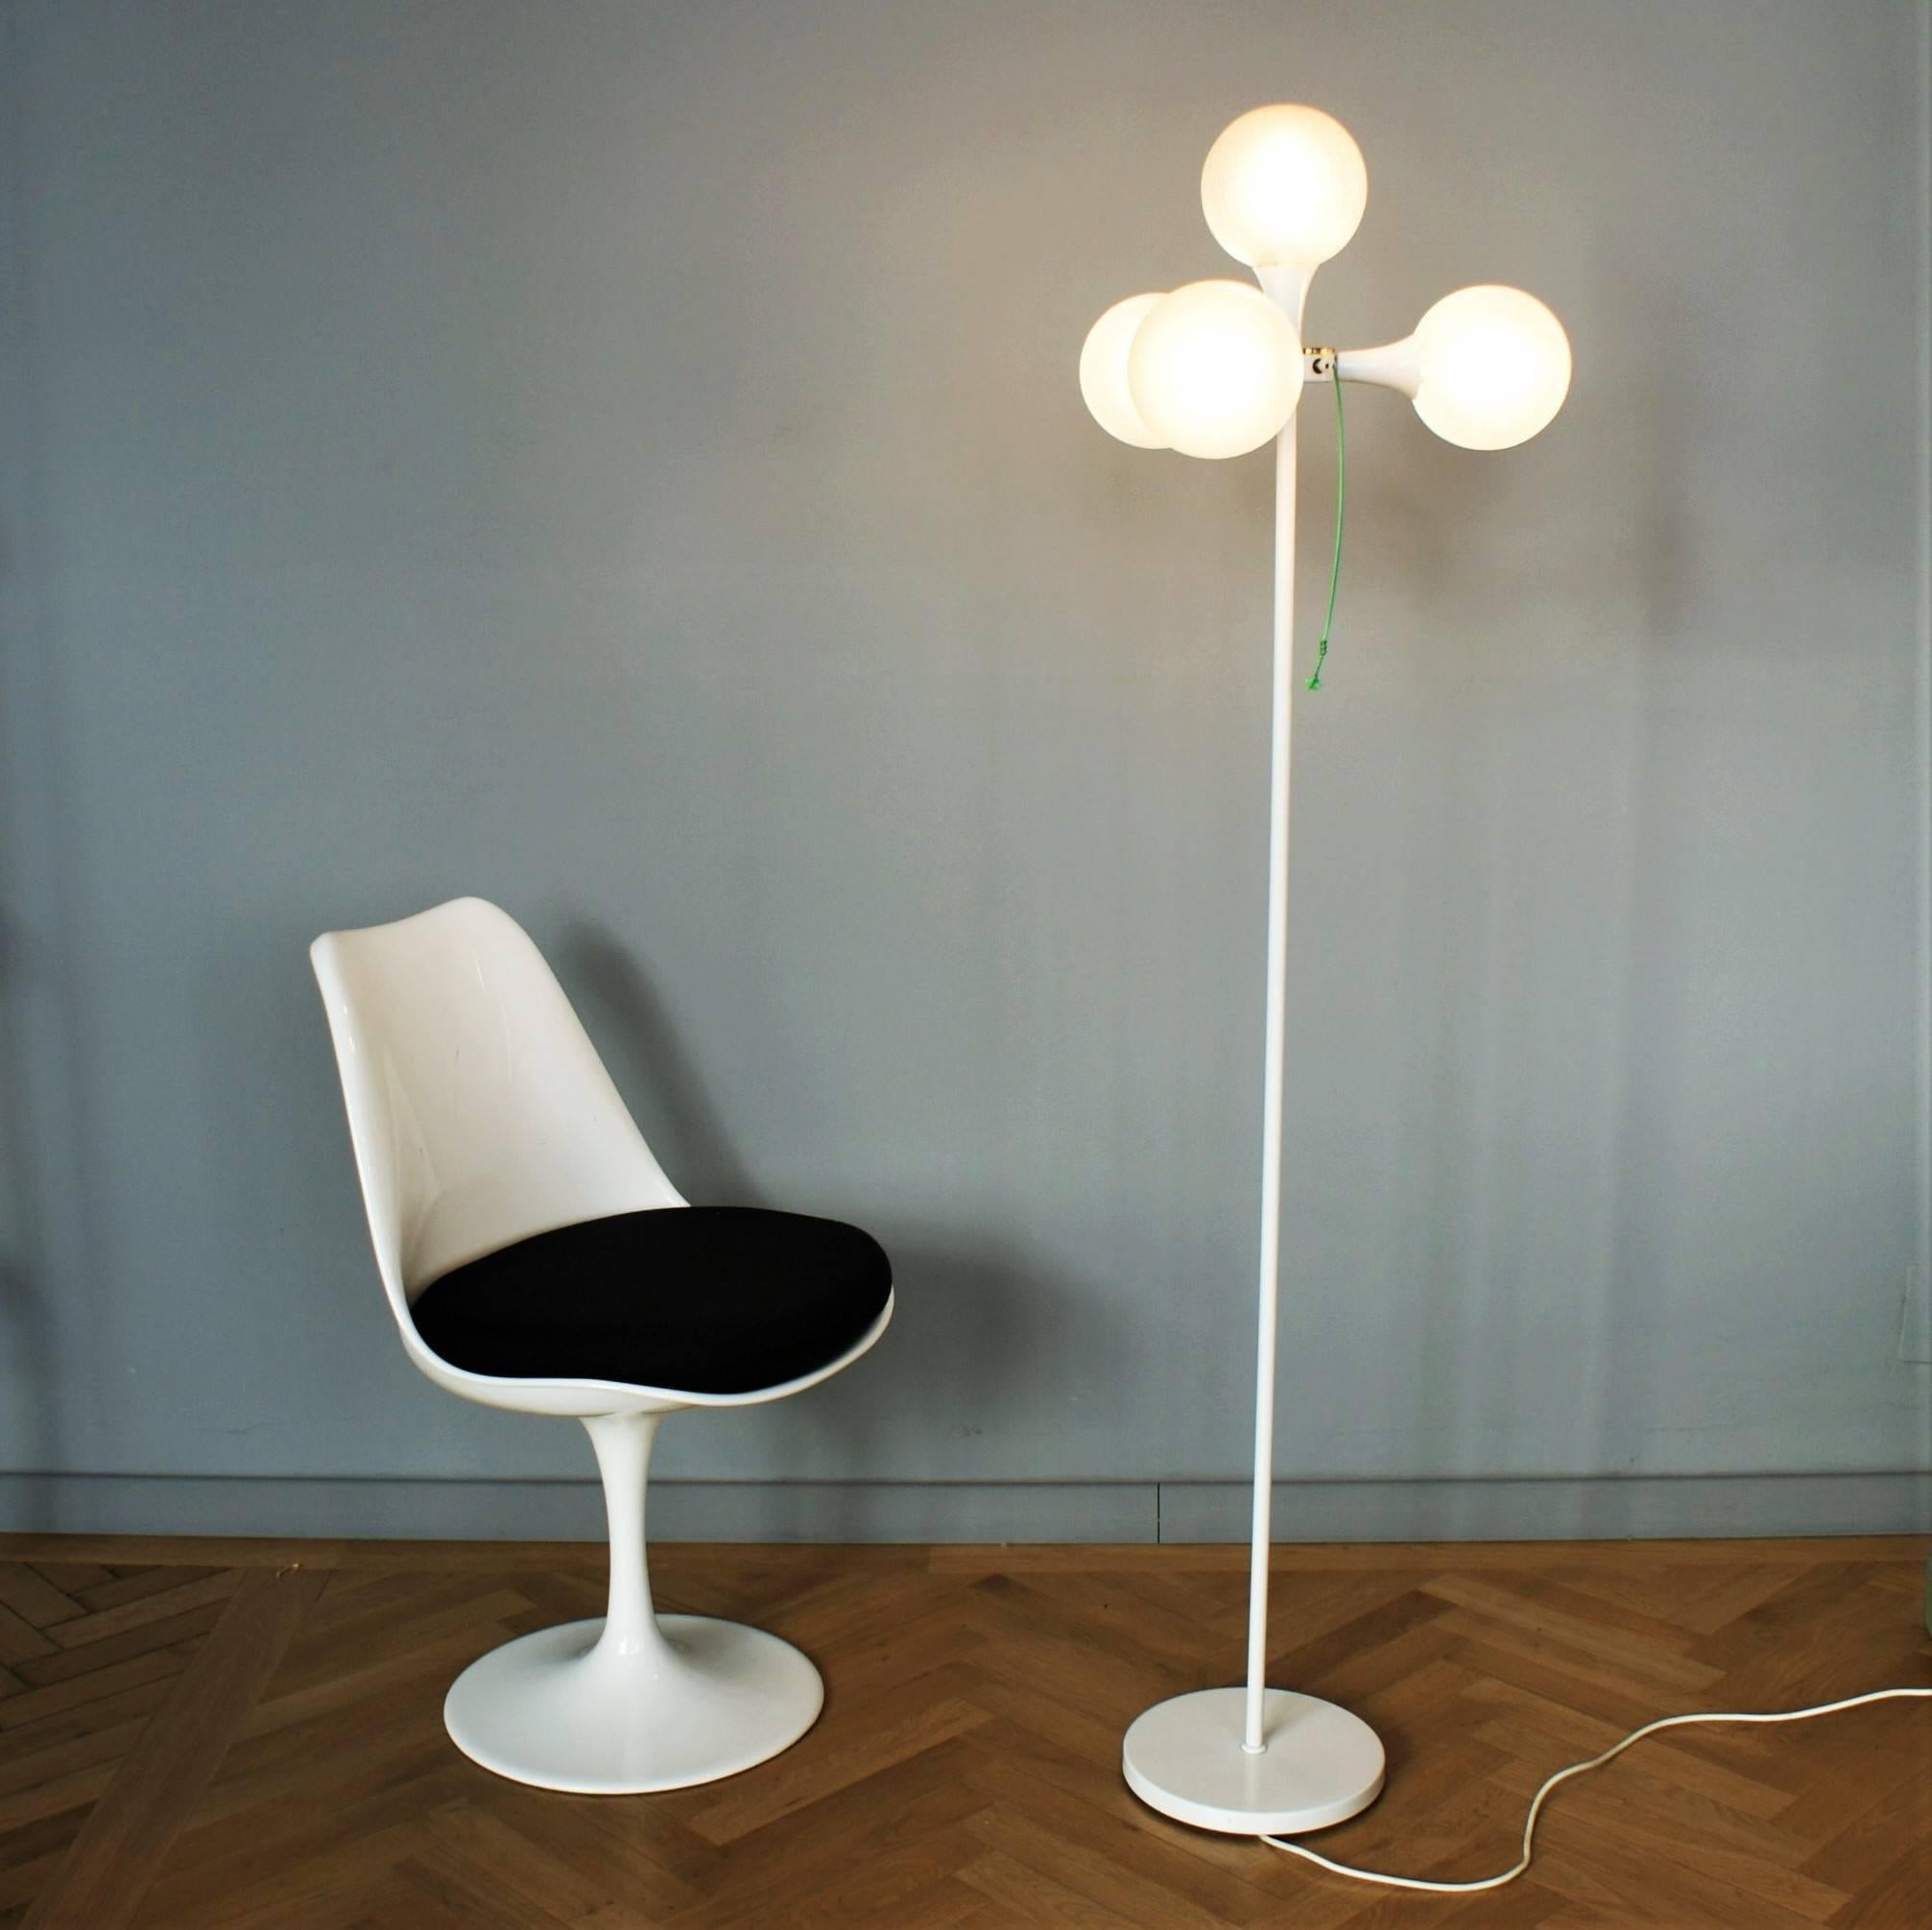 Simple and elegant Space Age white floor lamp with four Murano crackle glass globes which provide a smooth large-area light. The globe holders are made in tulip form which is typical of that era.

Fully working and tested condition.
Four E14 bulb